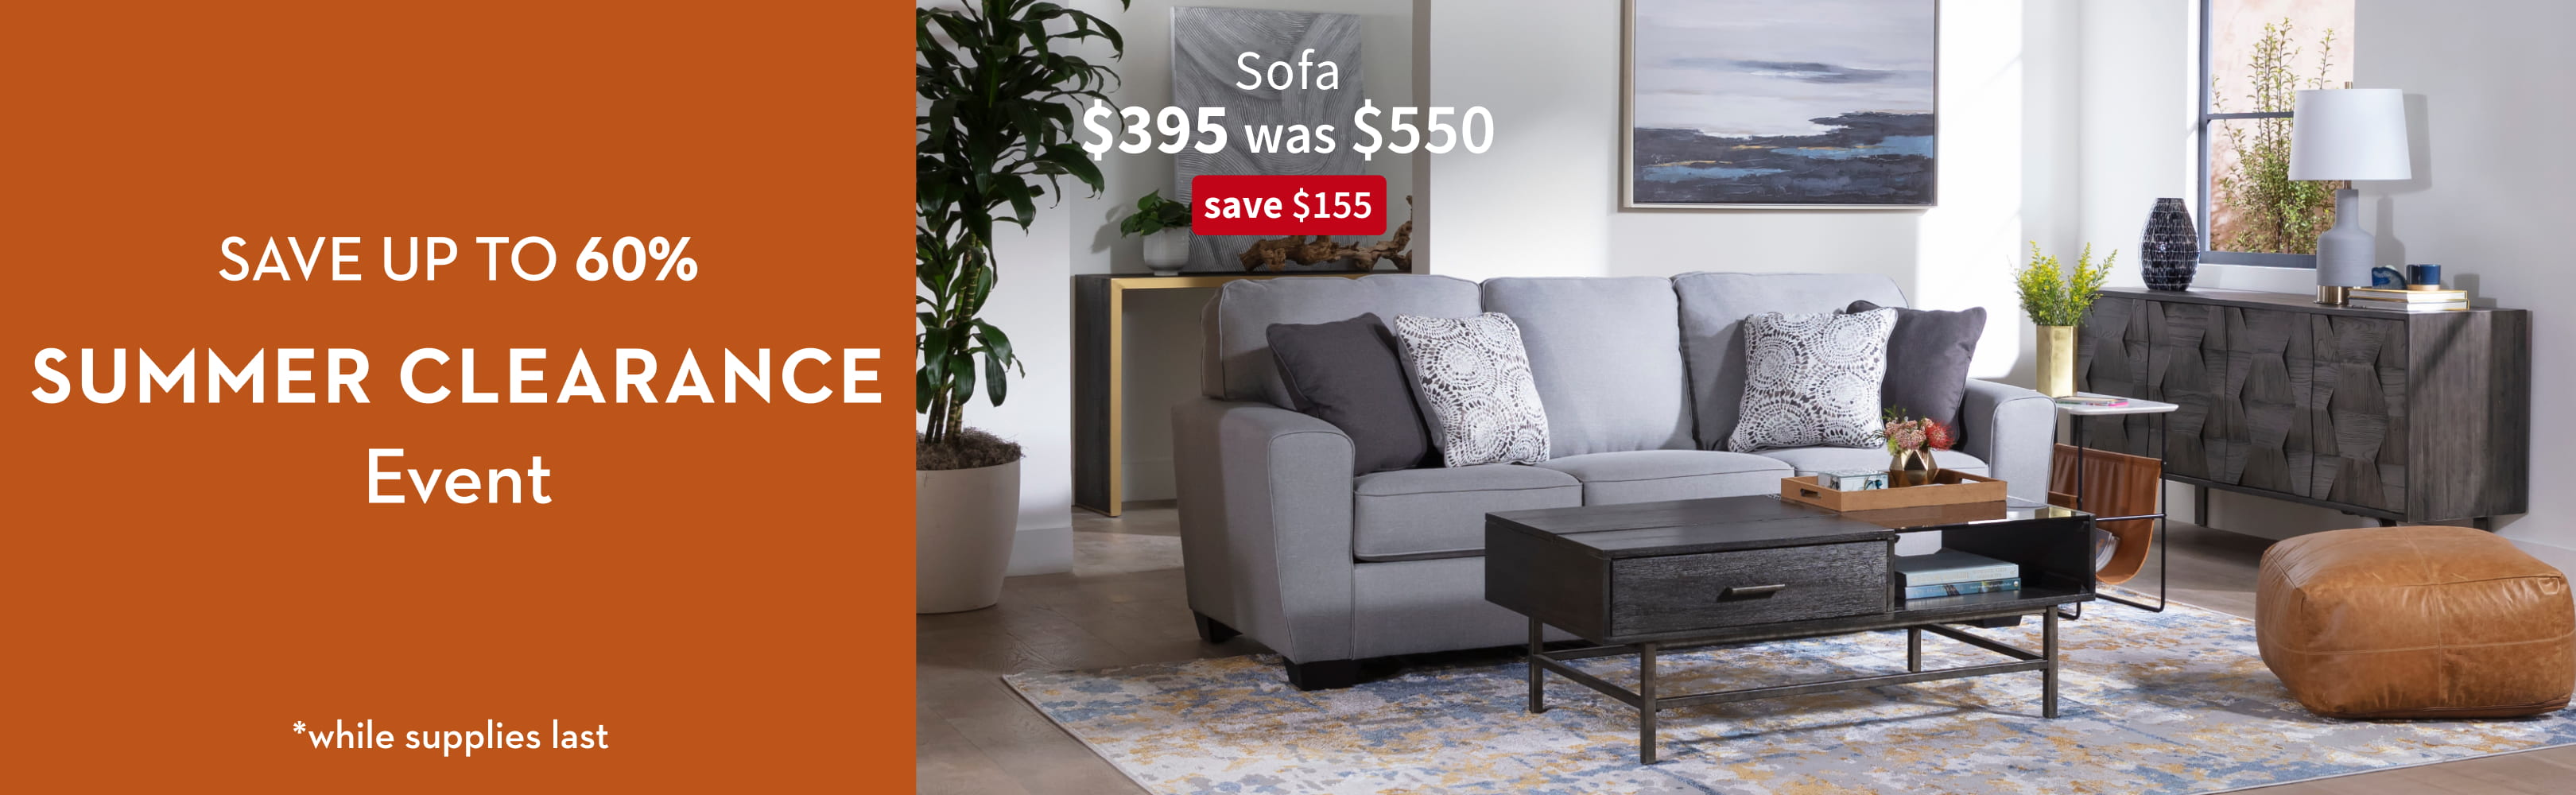 Save up to 60%. Summer Clearance Event *while supplies last. Sofa. $395 was $550. Save $155.